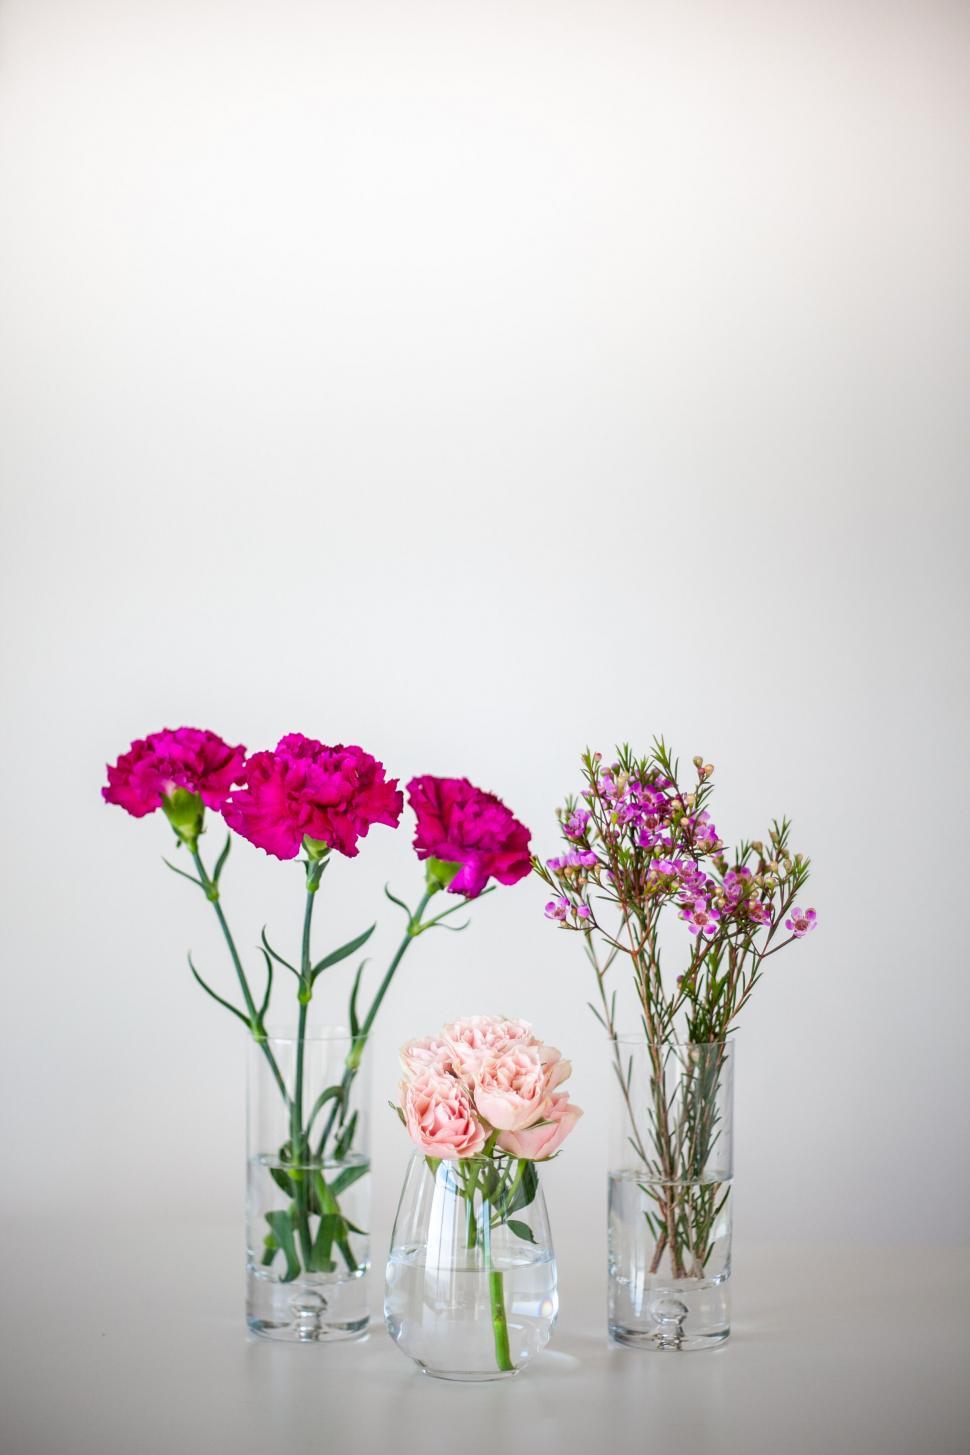 Free Image of Vases with colorful flowers on white background 